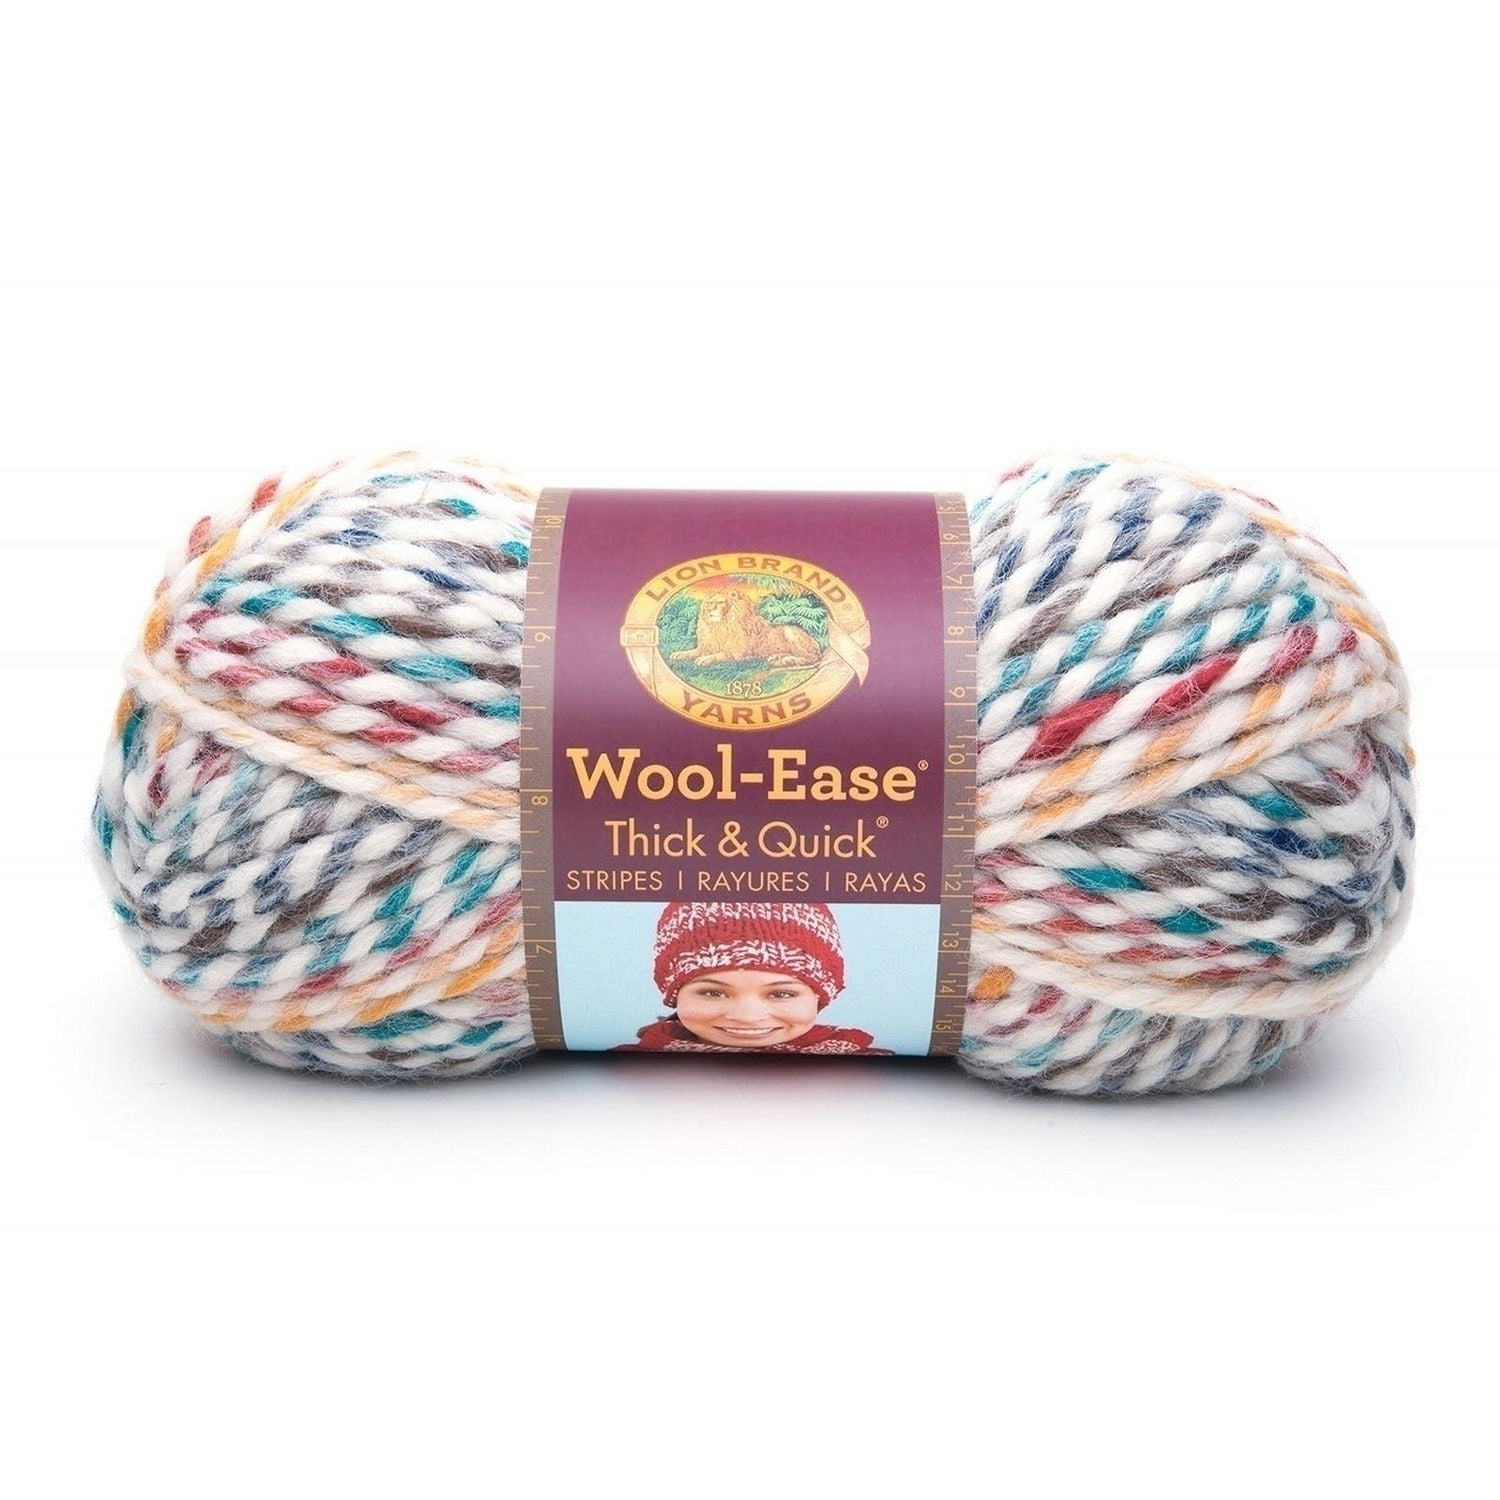 Lion Brand Wool - Ease Thick & Quick Yarn - Claret - Wool - Ease